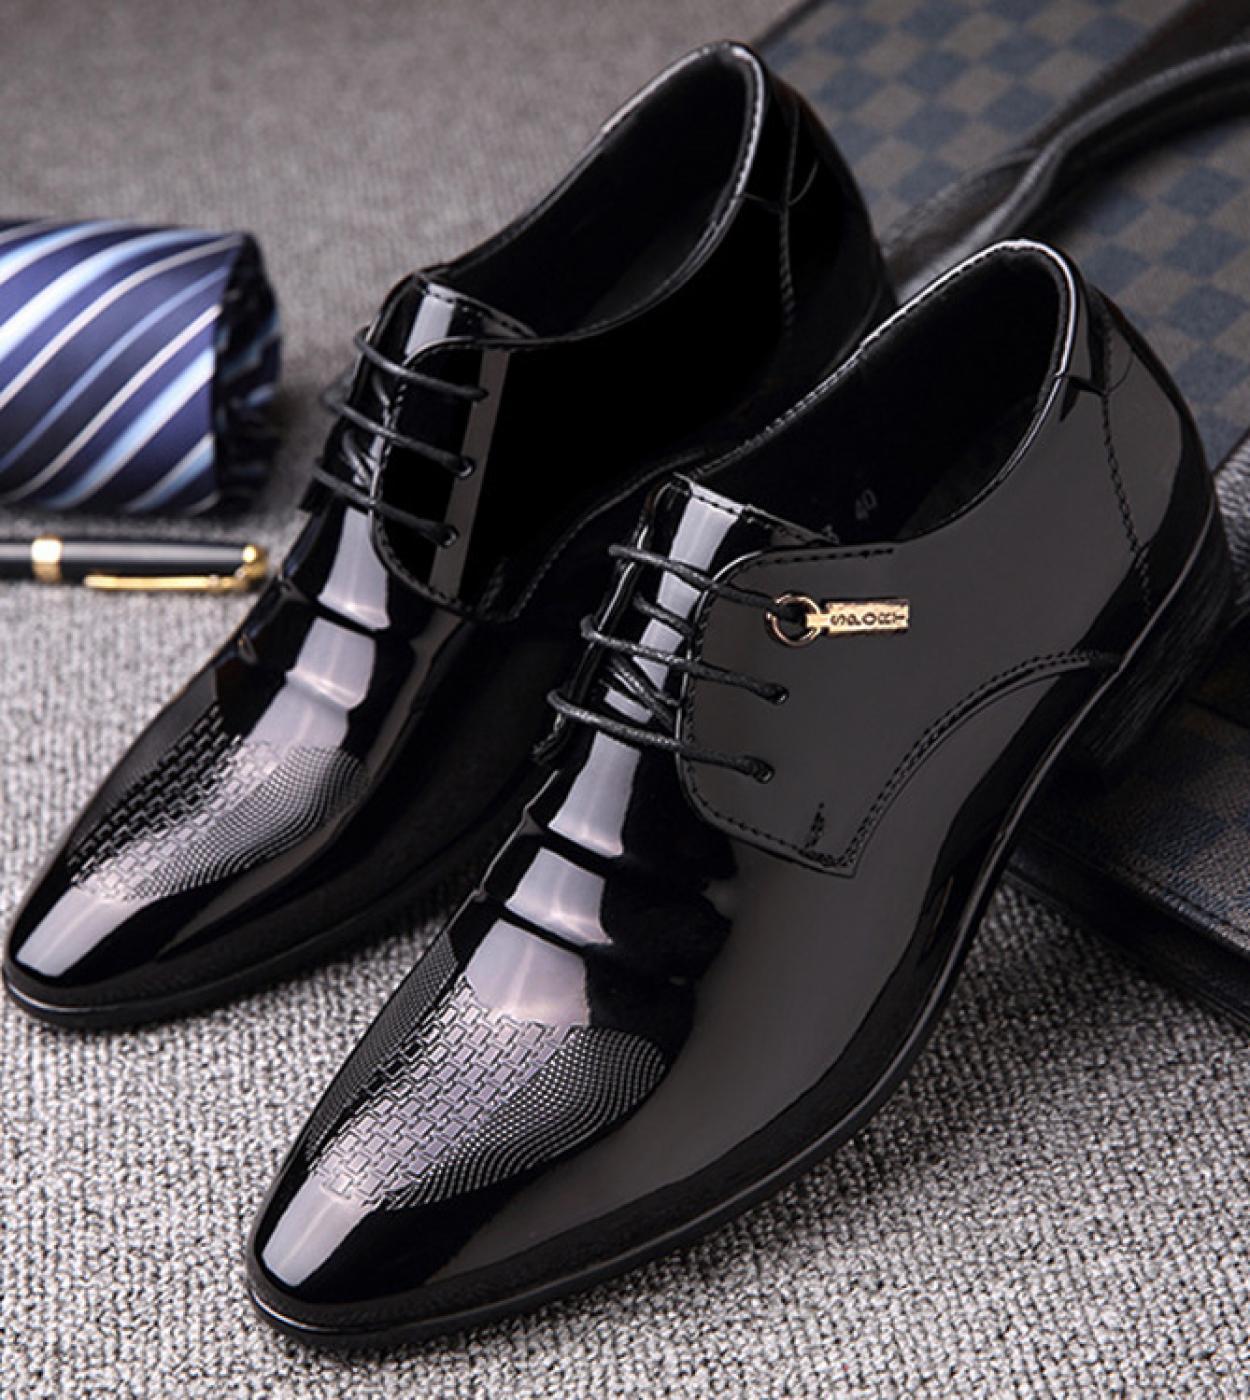 Fashion Elegant Dress Shoes For Men Italian Man Formal Leather Shoes Male Casual Society Loafers Shoe Male Footwear Larg